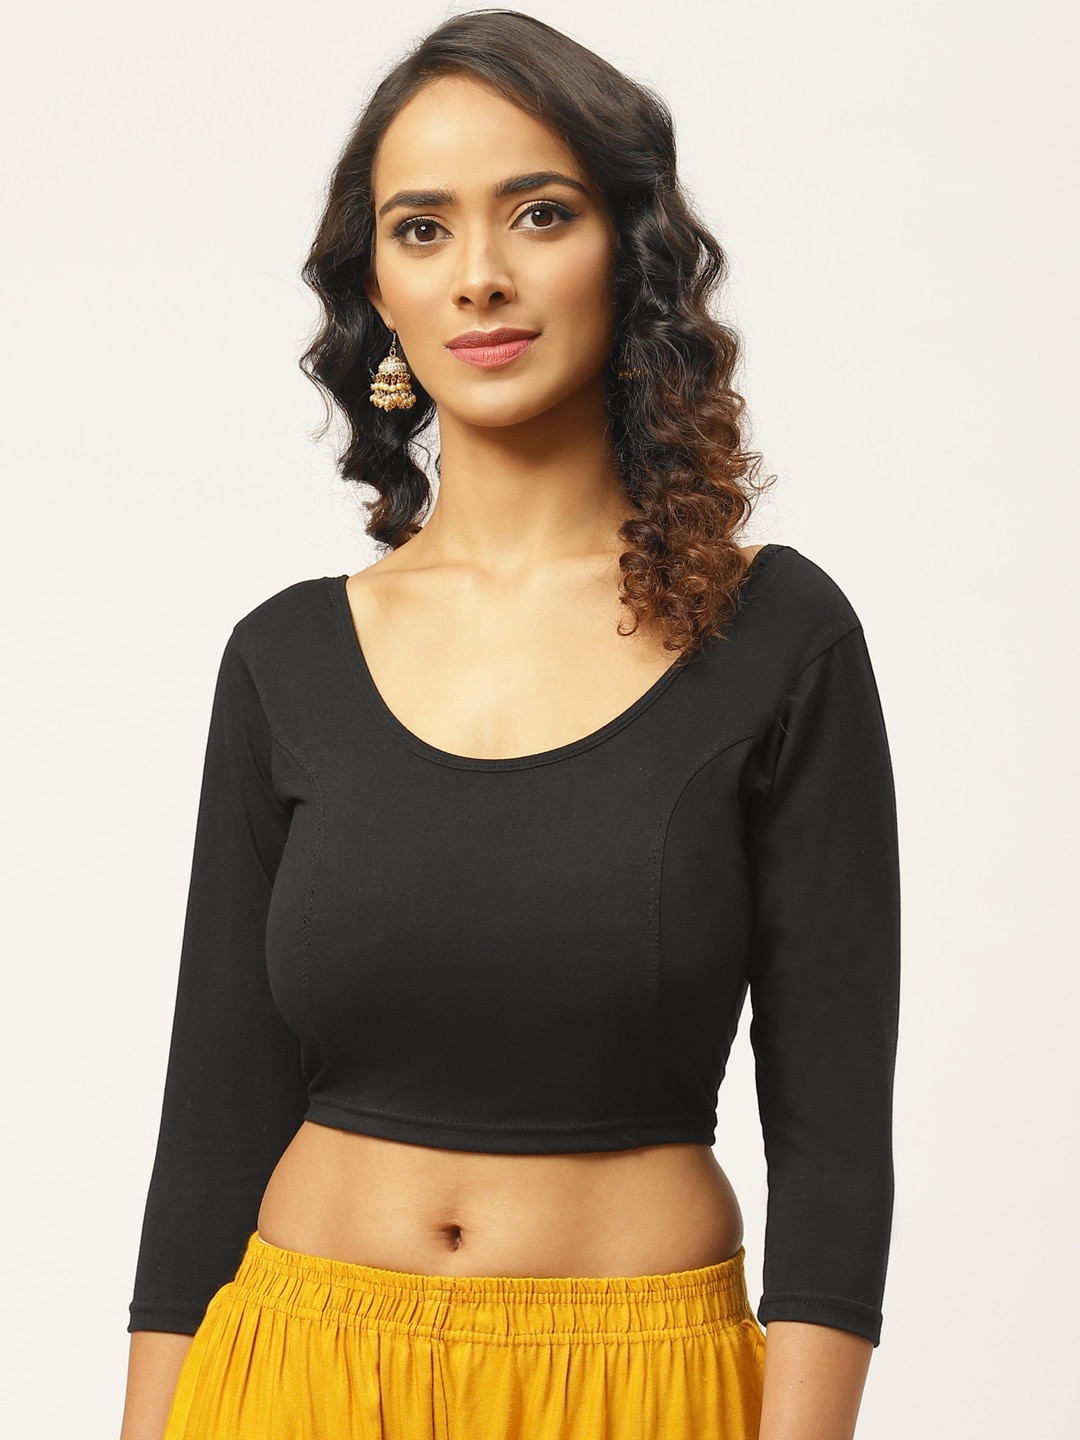 VASTRANAND Women Black Cotton Solid Stretchable Saree Blouse Price in India